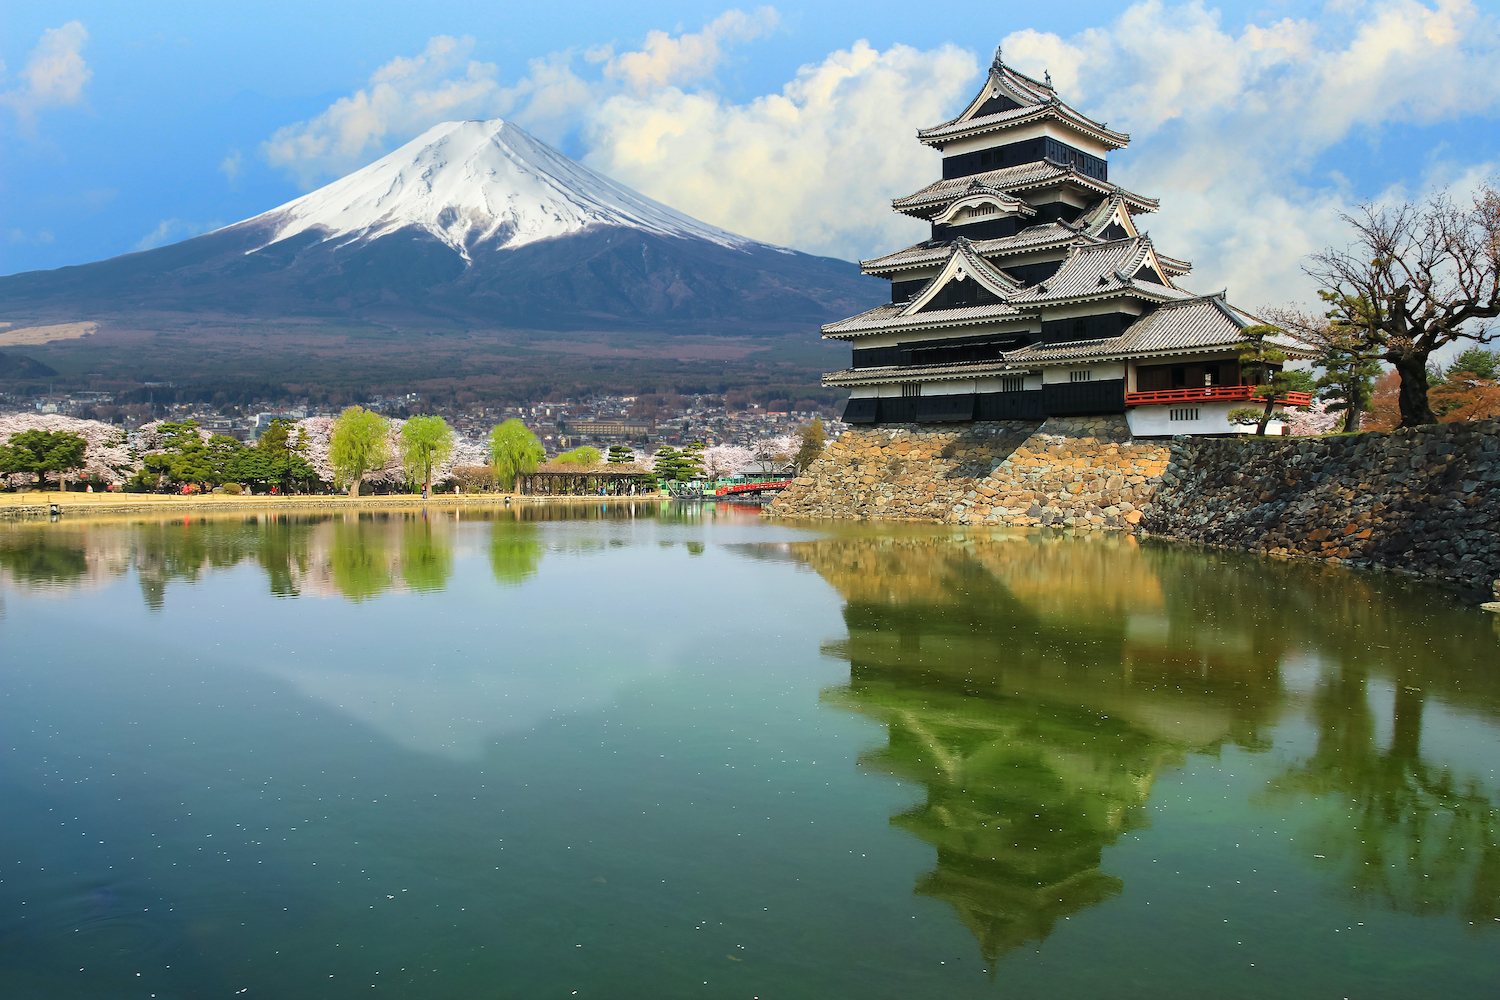 Matsumoto Castle and mountain Fuji background with and beautiful sakura cherry blossom festival, One of Japan's premier historic castles.